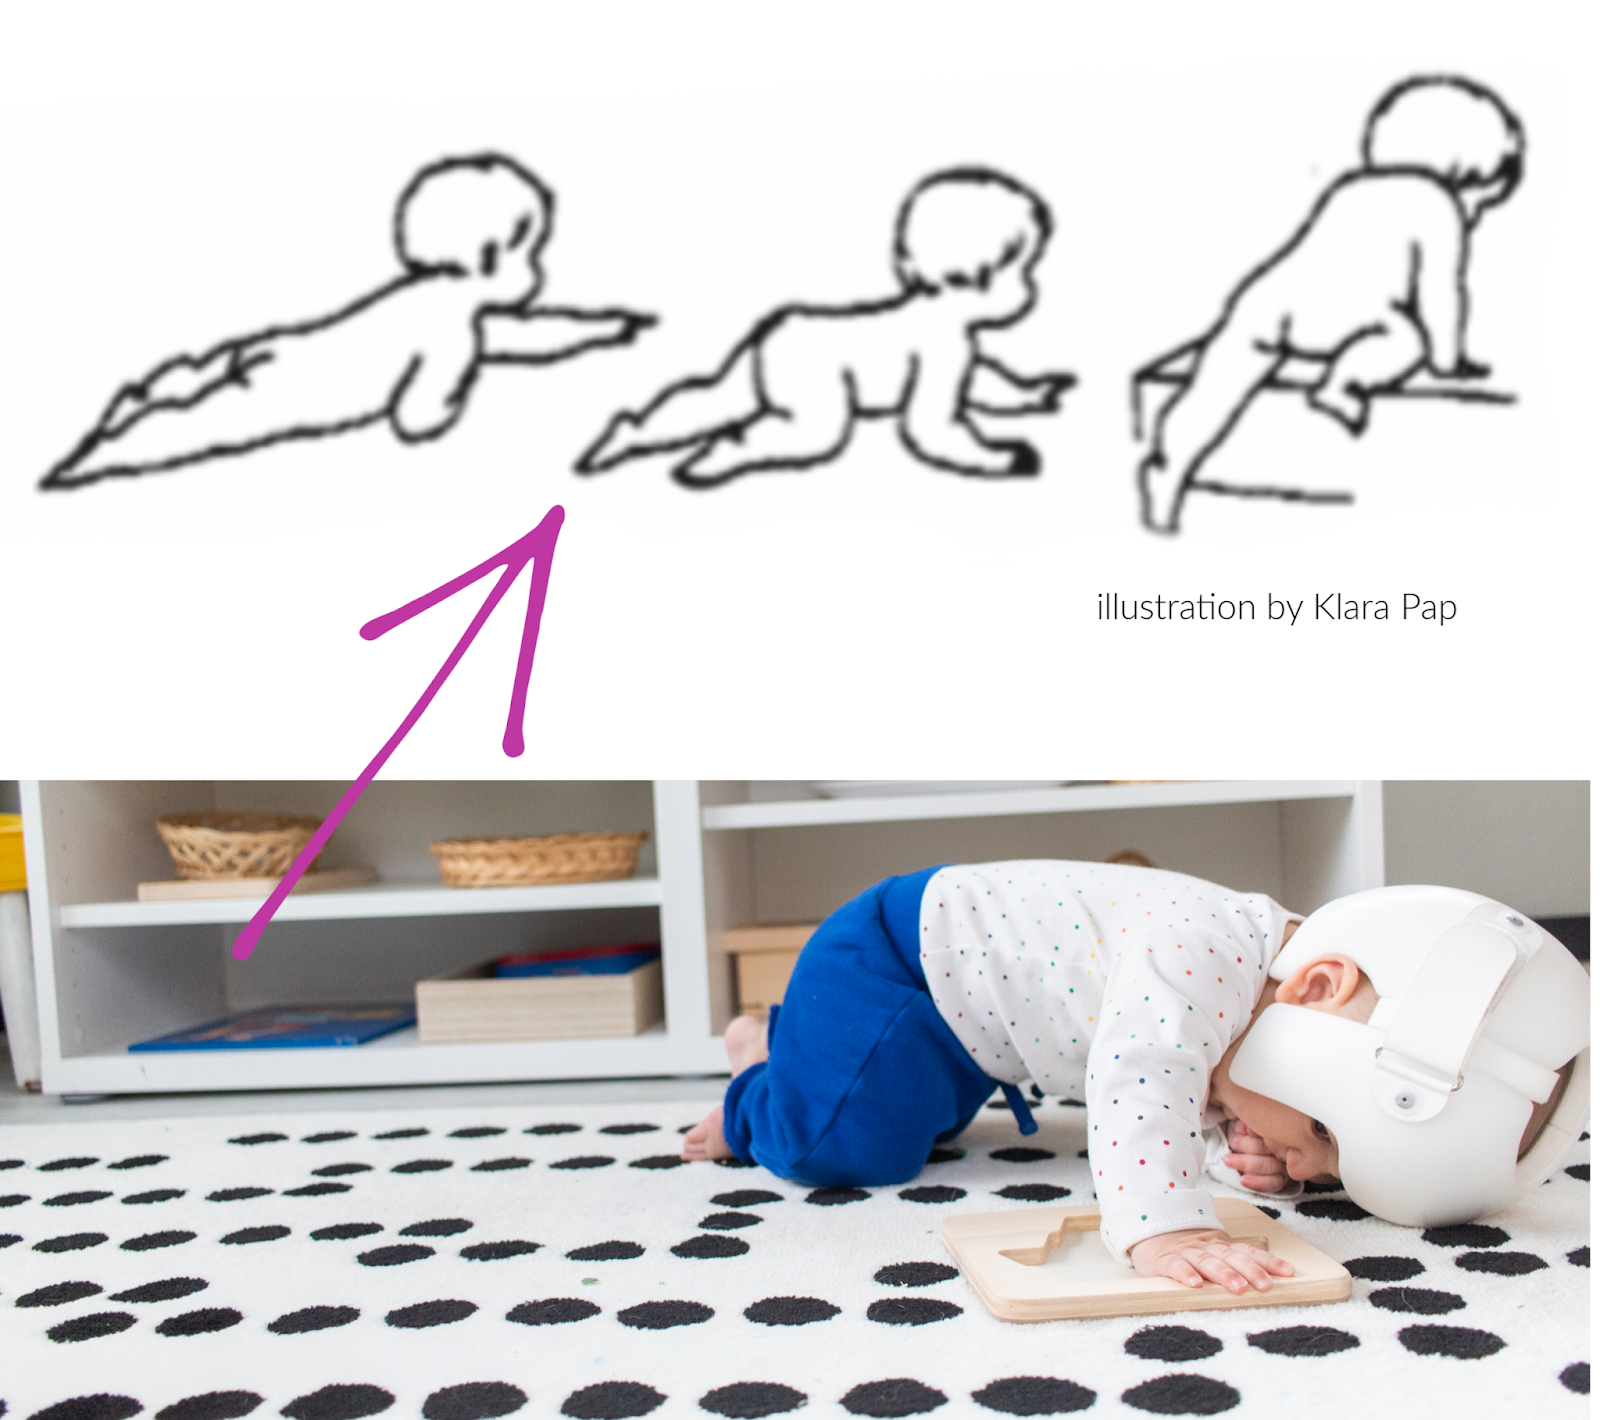 Montessori baby activities don't always need to be about the toys. Sometimes it's more important to sit back and observe little milestones, like all the beautiful natural gross motor movements that come from following the child.